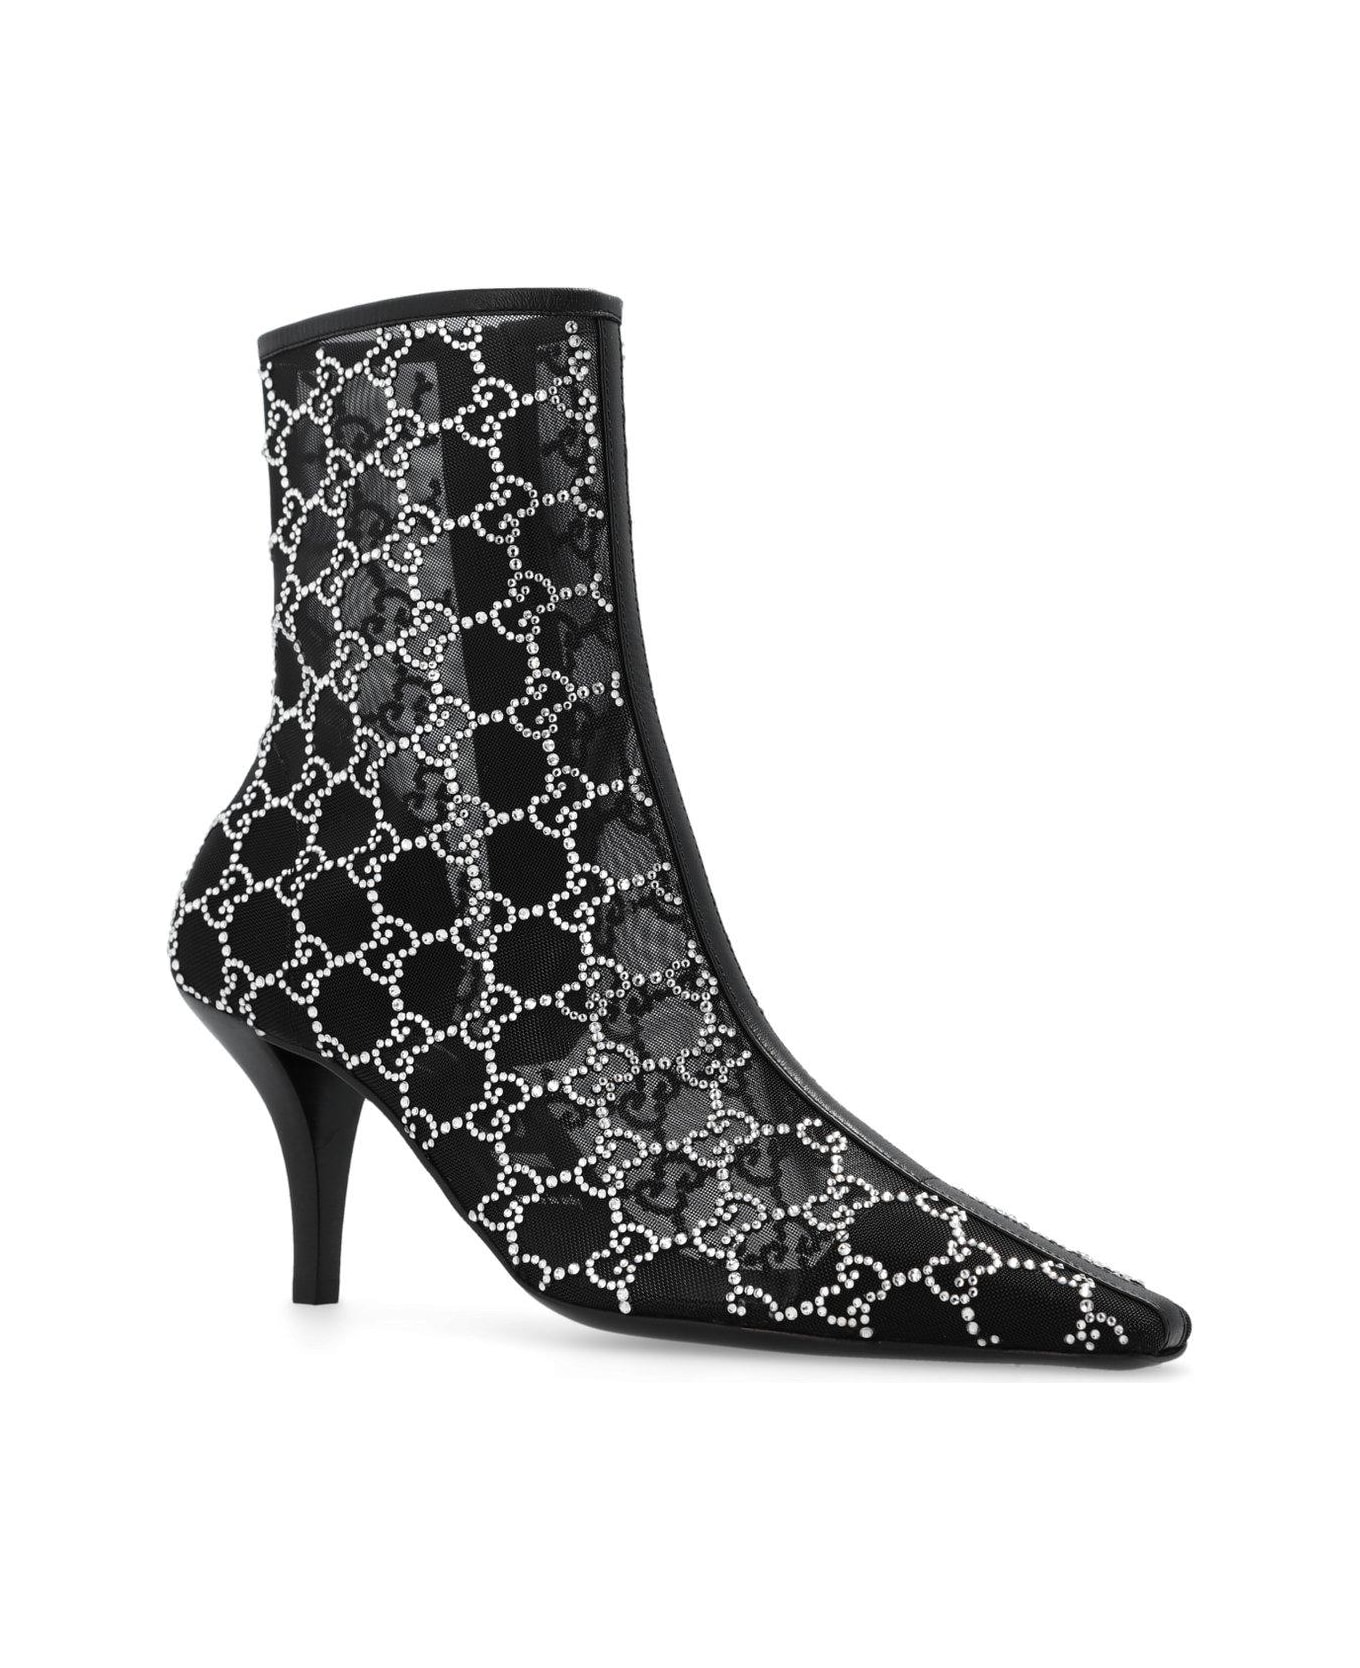 Gucci Gg Crystals-embellished Pointed-toe Ankle Boots - Black ブーツ